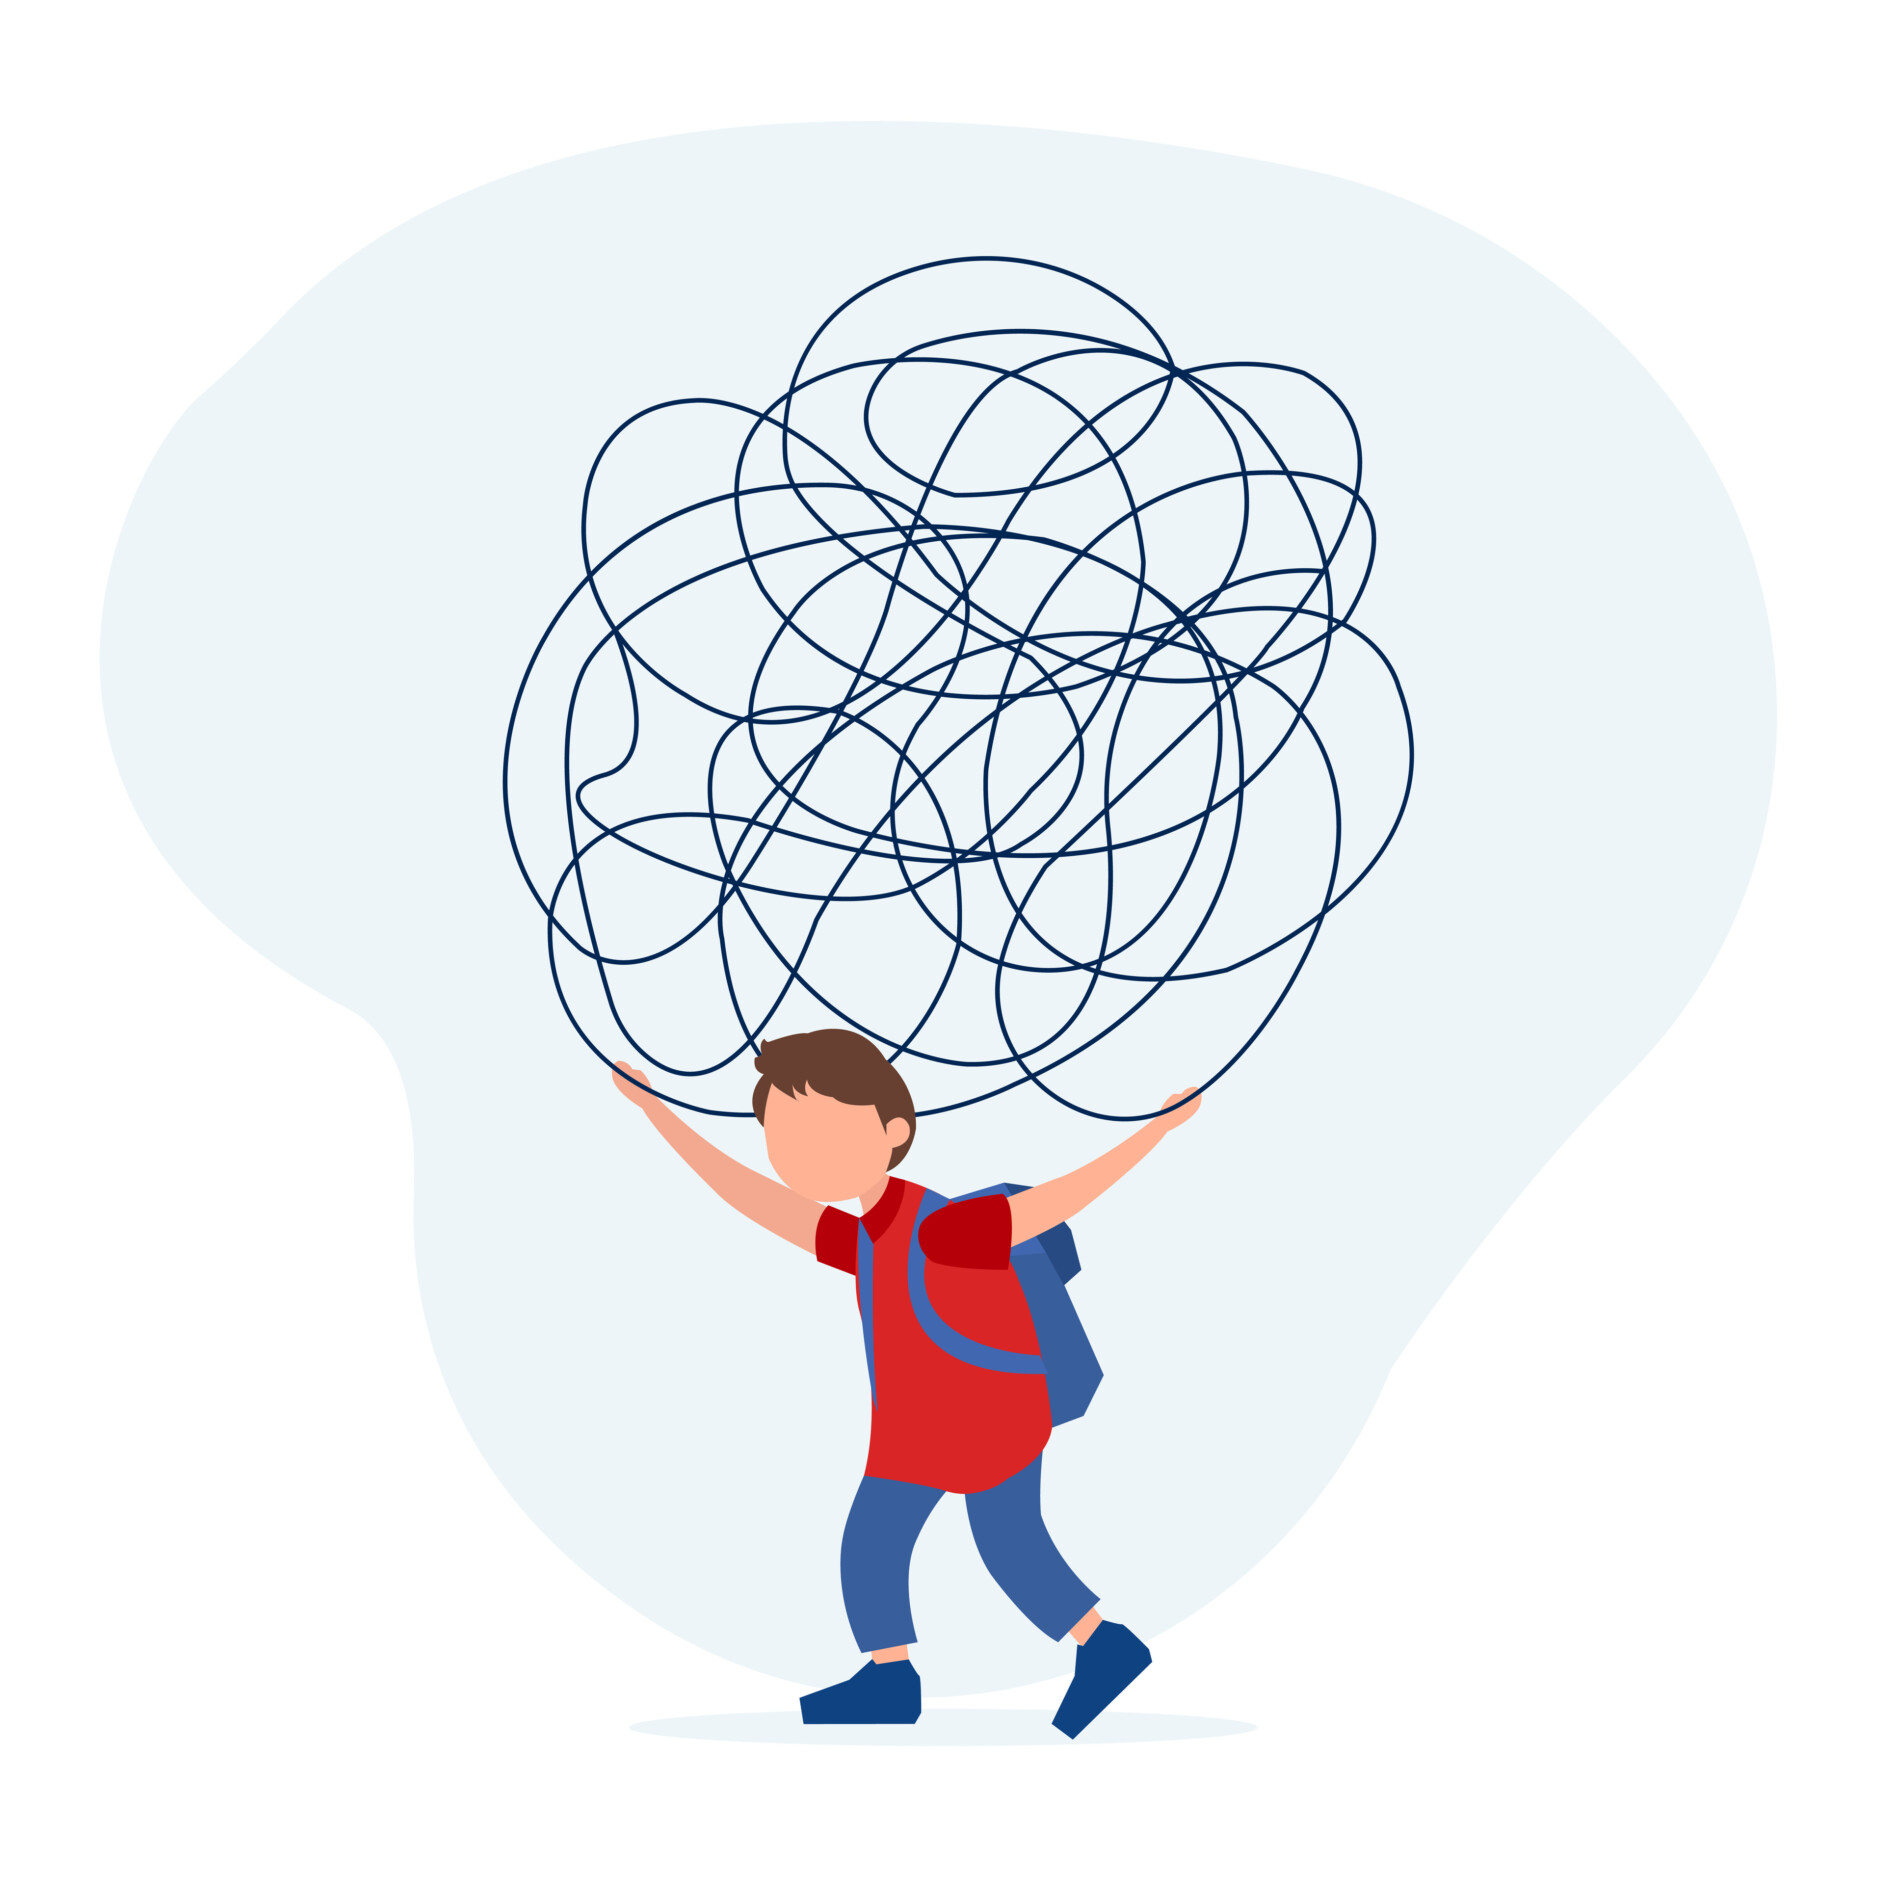 an illustration of a young boy carrying a ball of messy lines